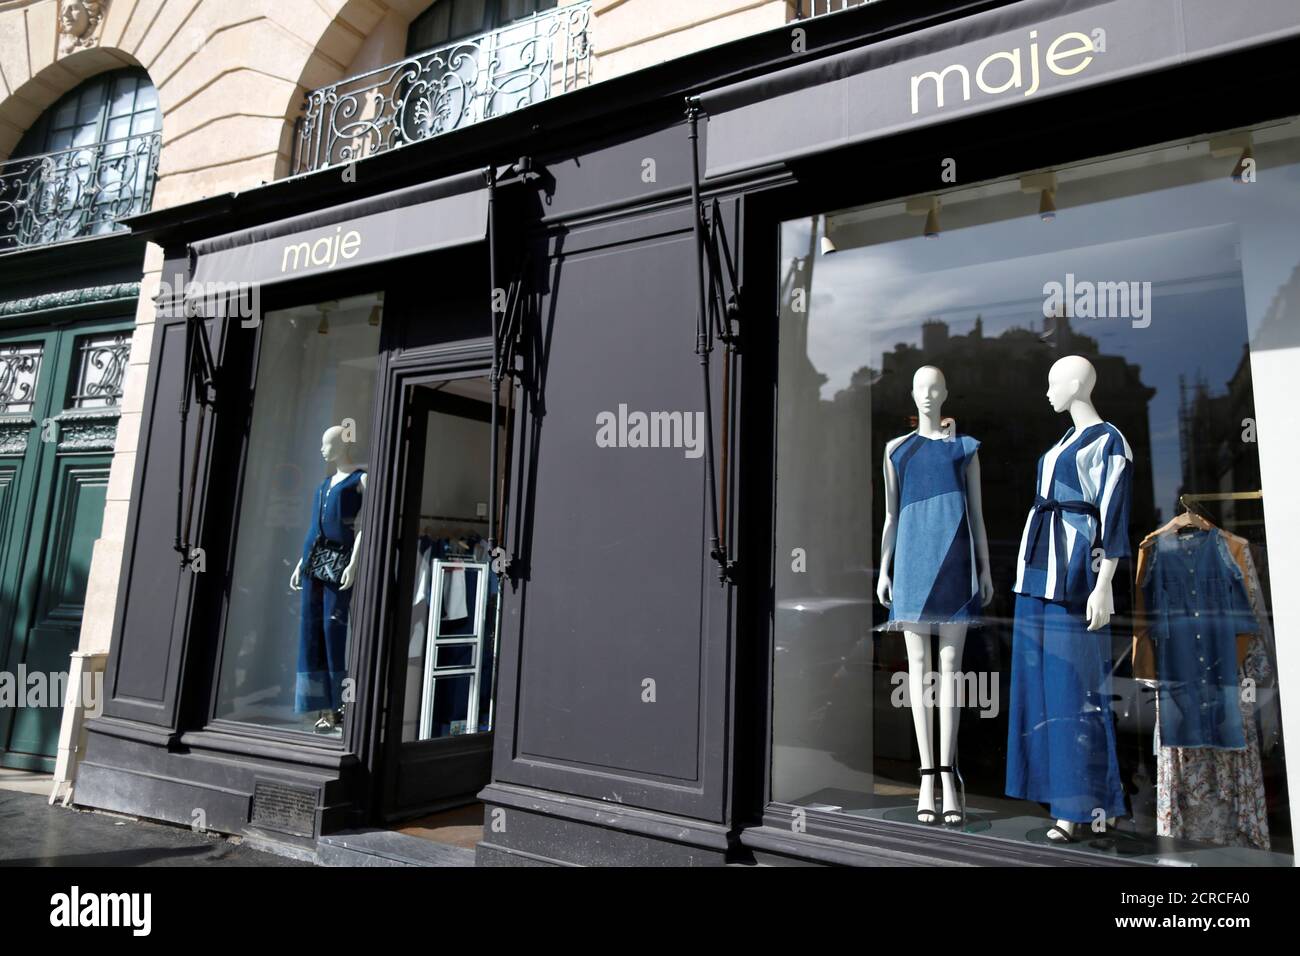 The logo of ready-to-wear Maje brand is seen on a fashion shop storefront  in Paris, France, March 29, 2017. REUTERS/Charles Platiau Stock Photo -  Alamy